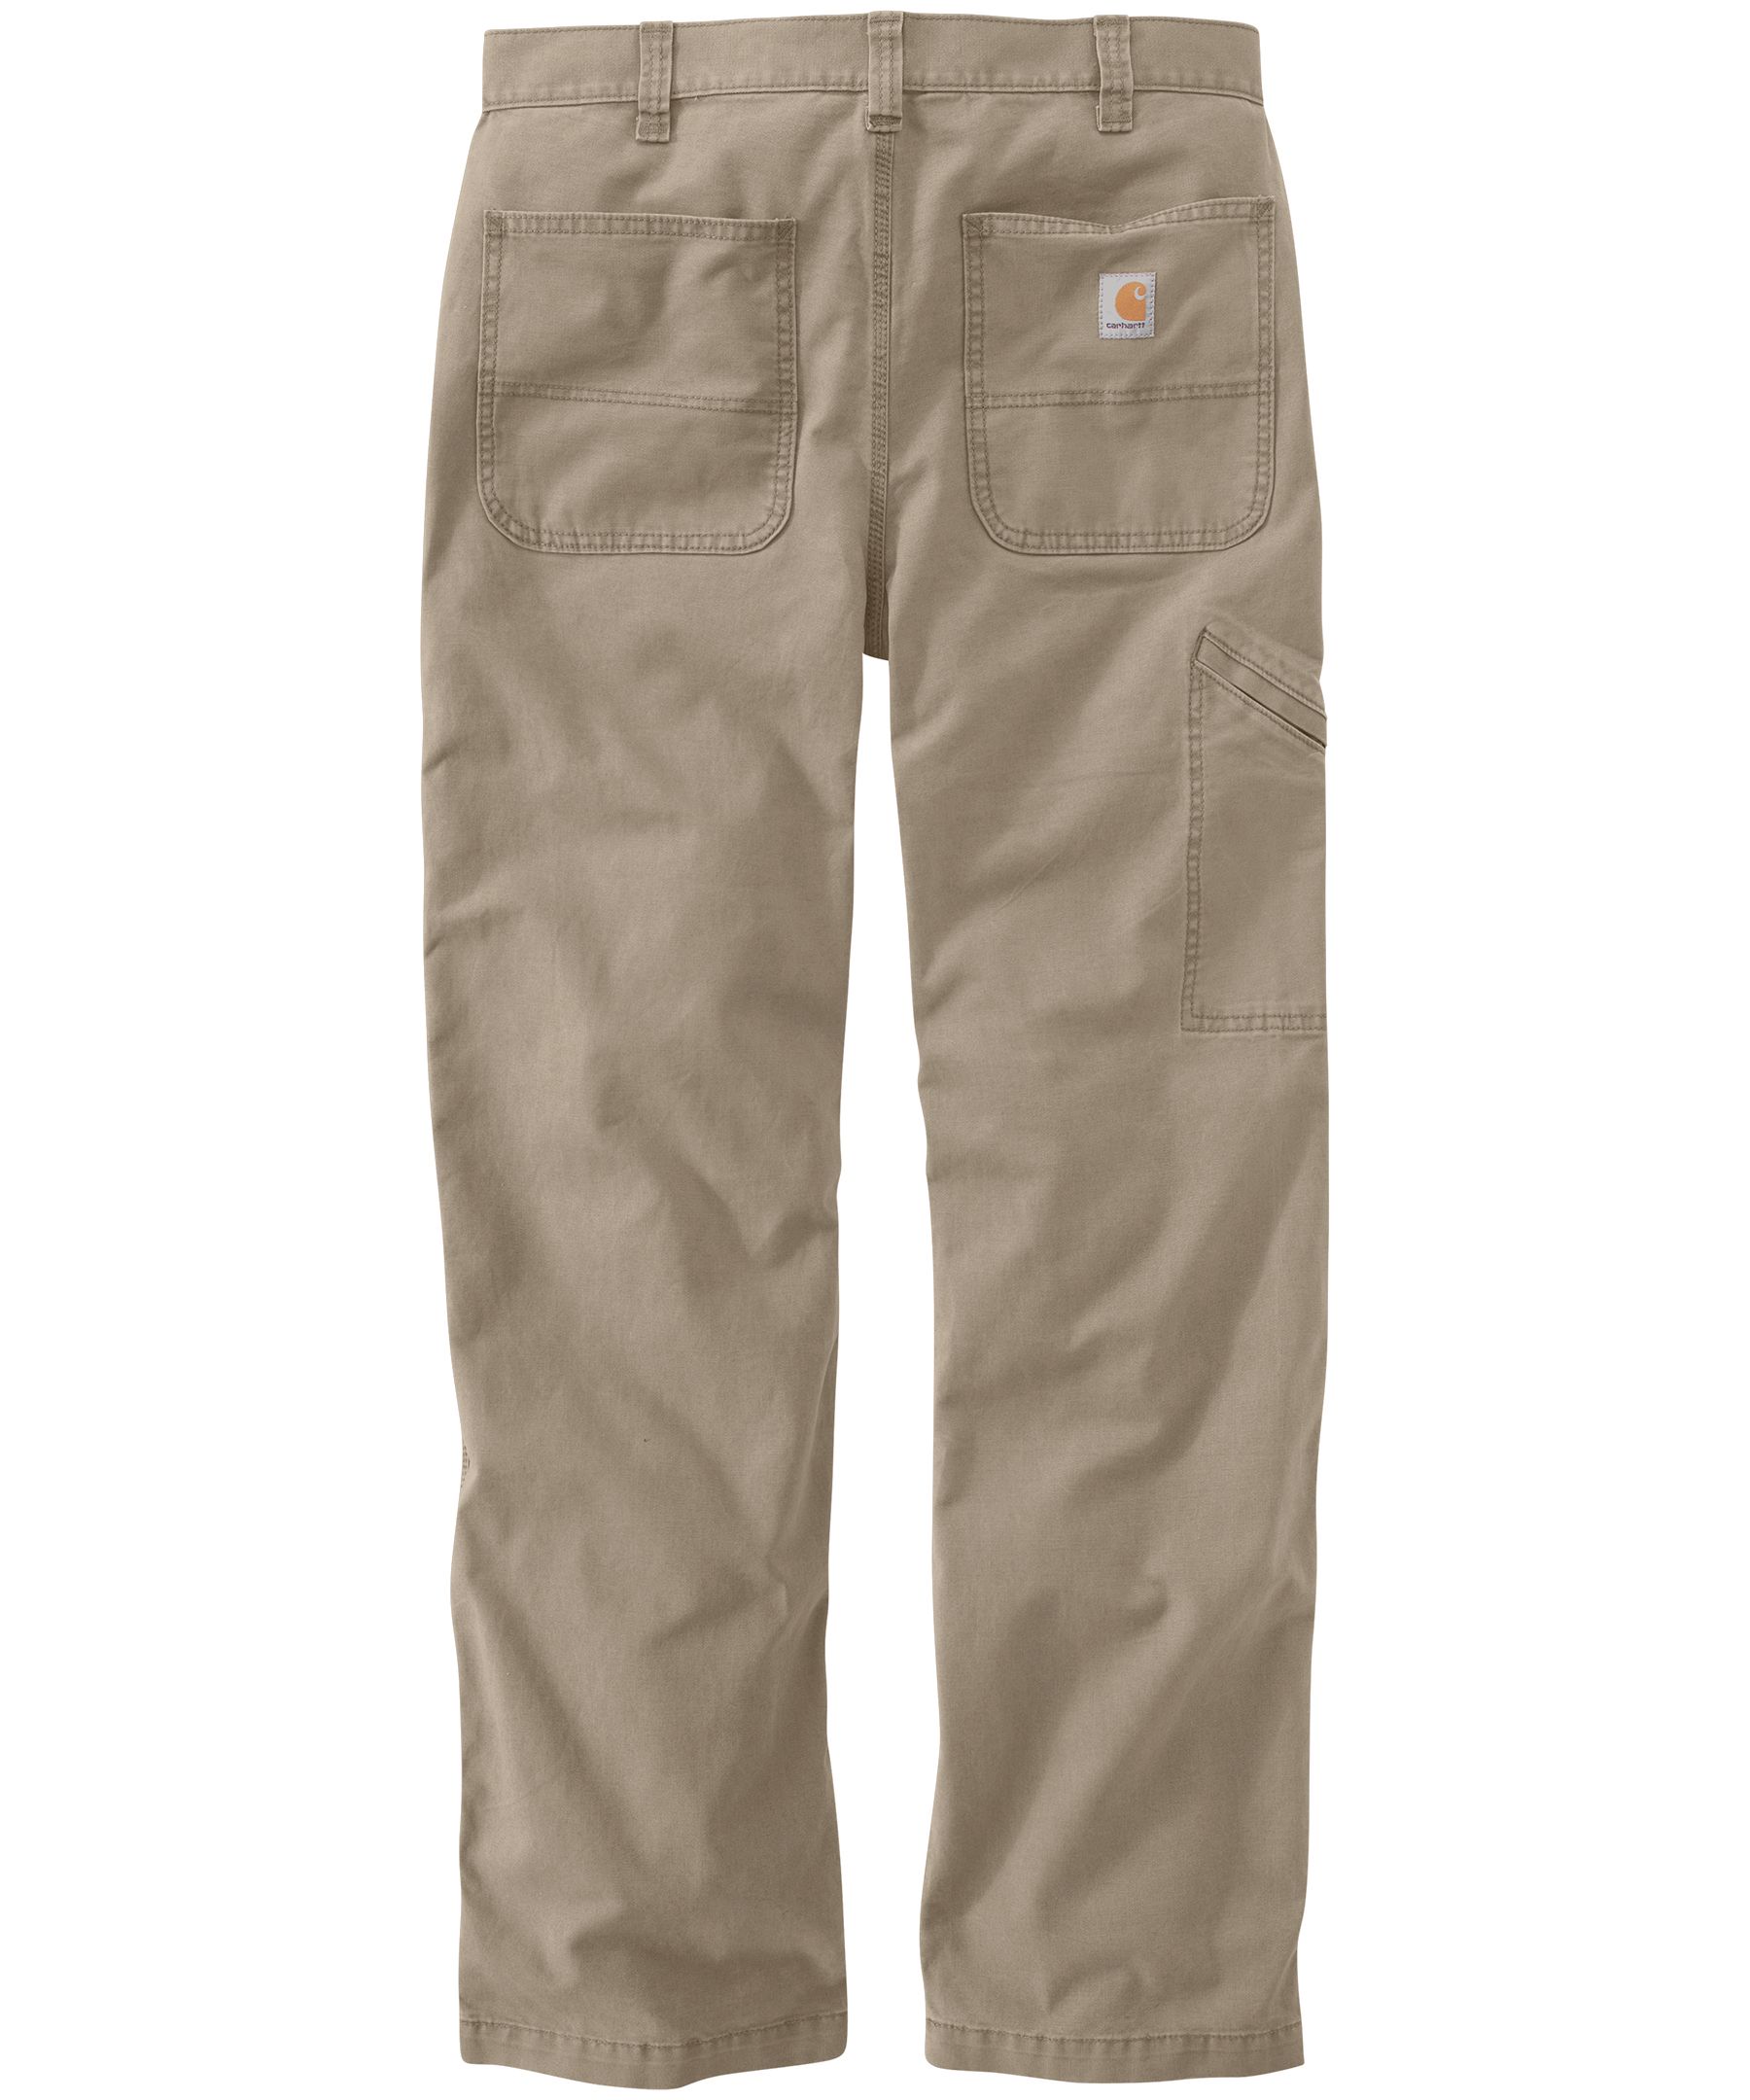 Carhartt Rugged Flex Relaxed Fit Duck Dungaree Pant - Men's - Clothing